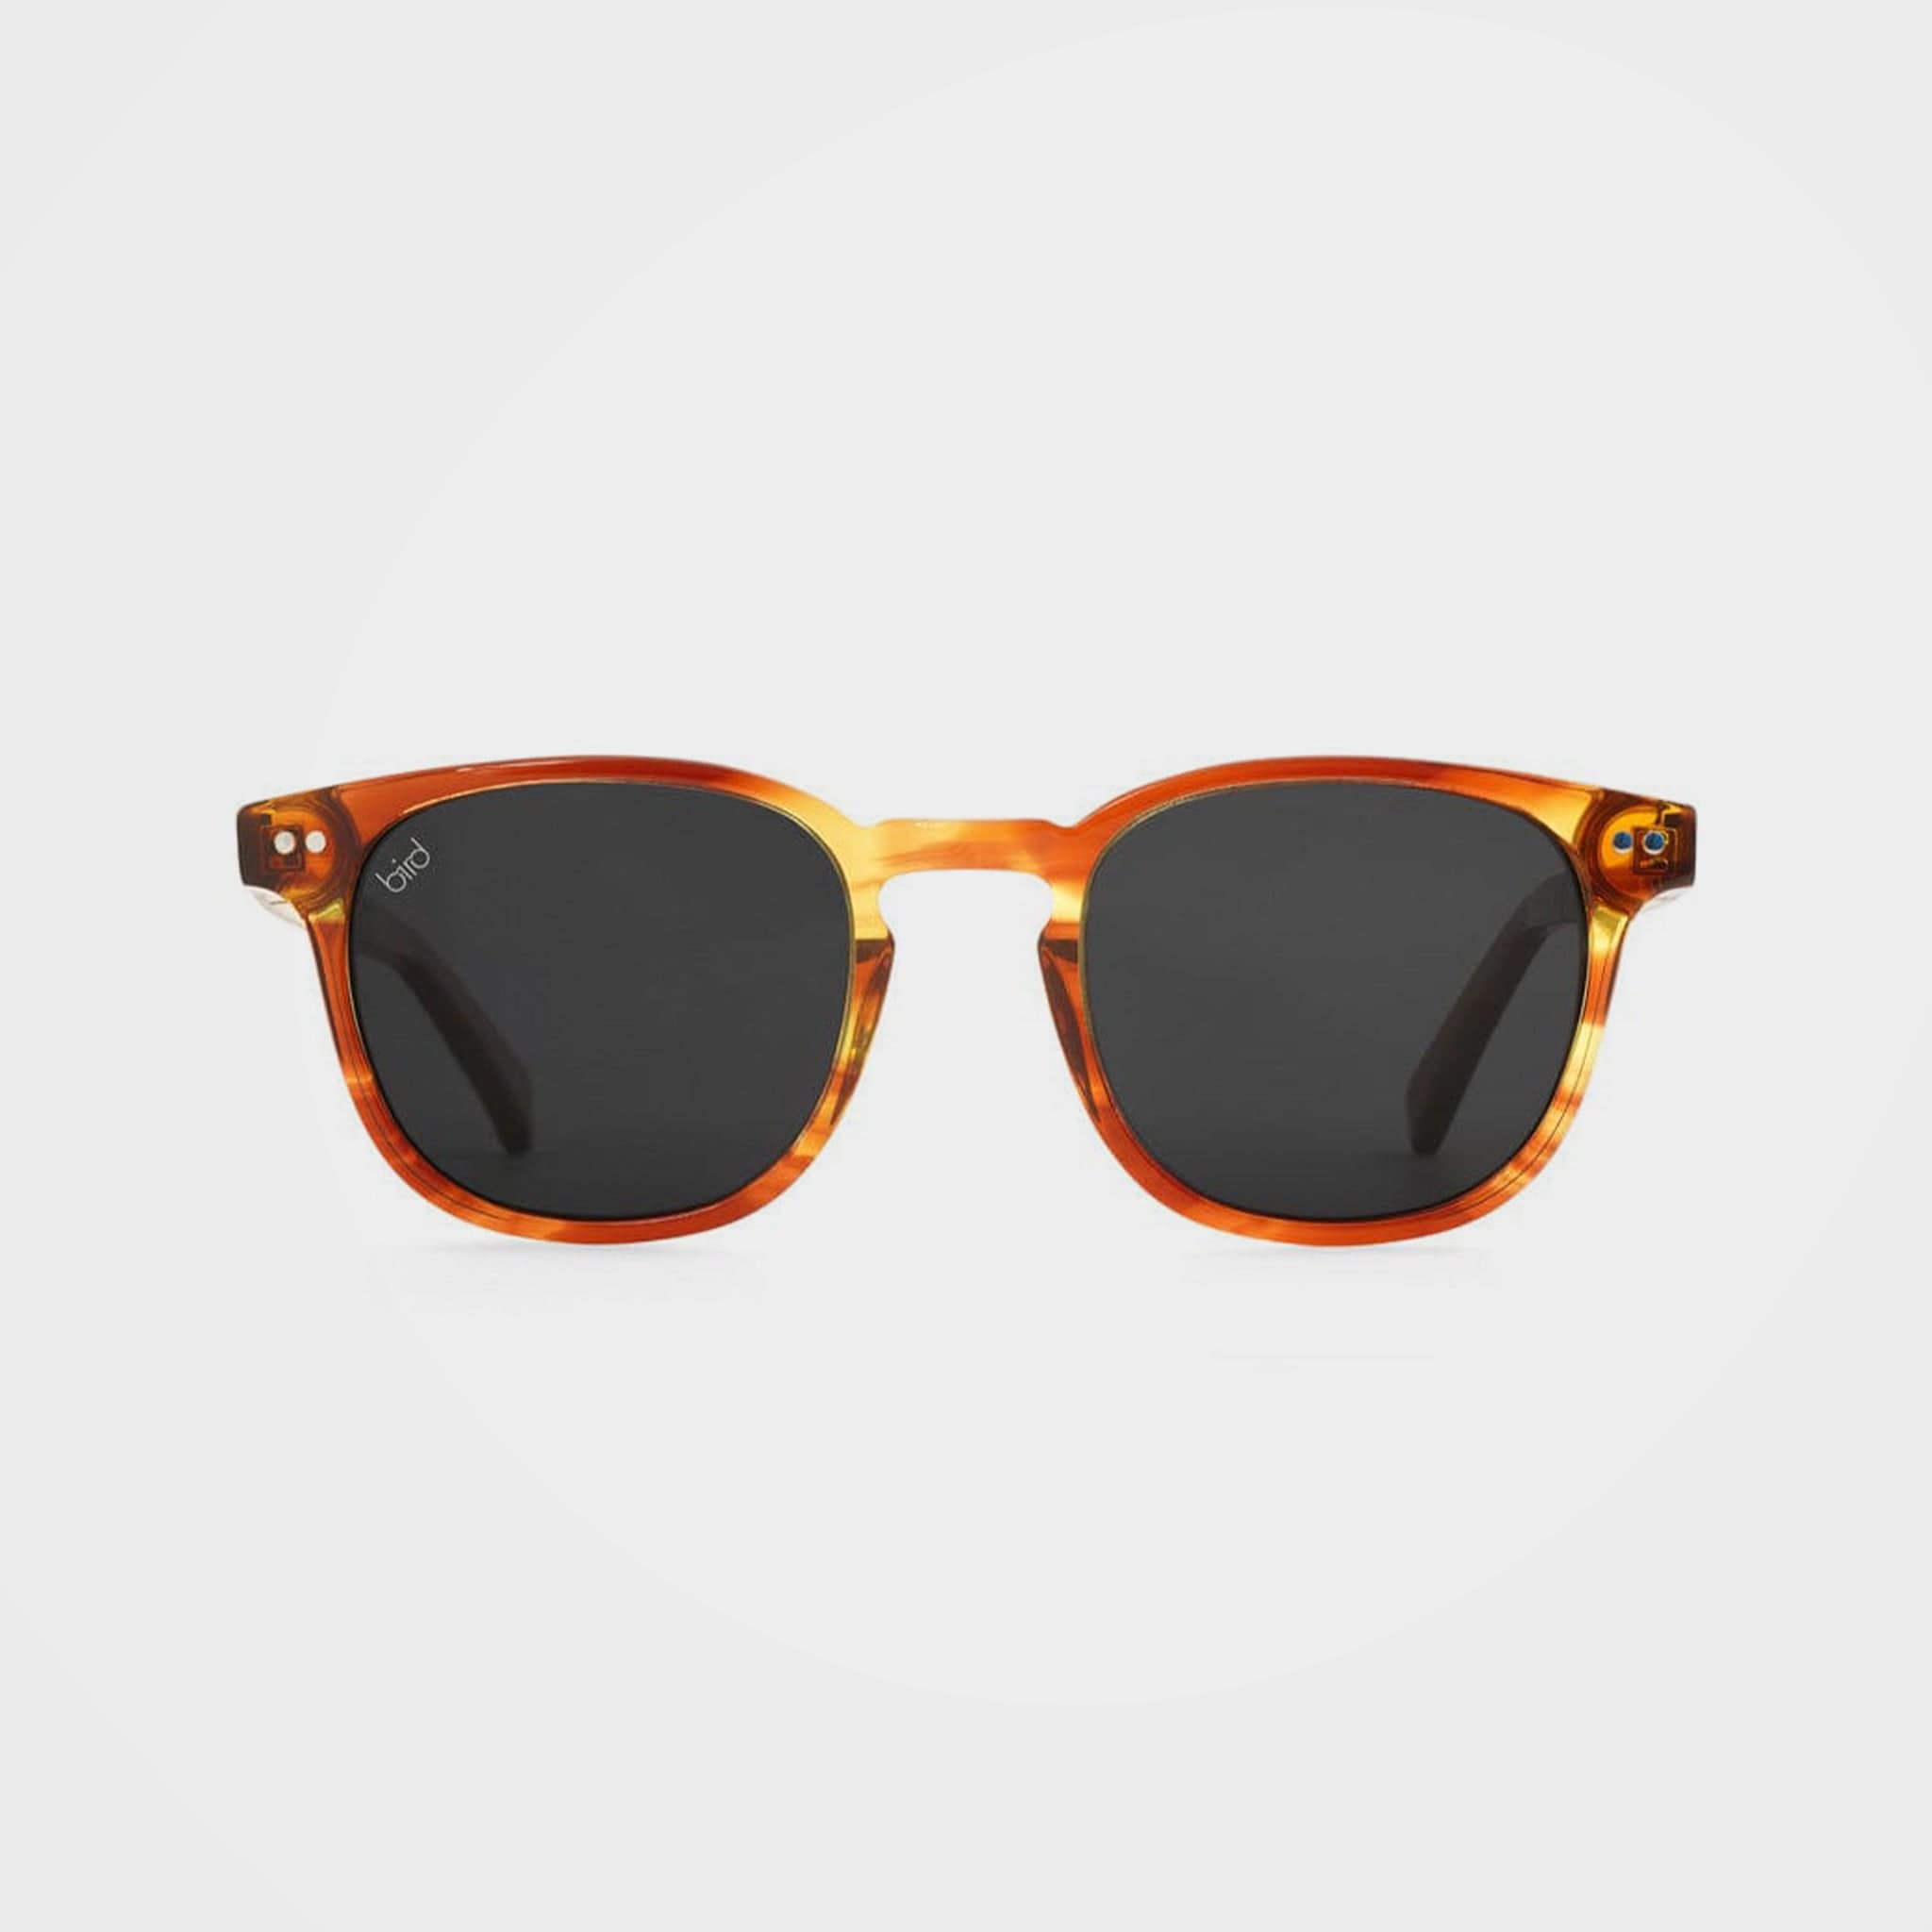 Best sunglasses for long-shaped face